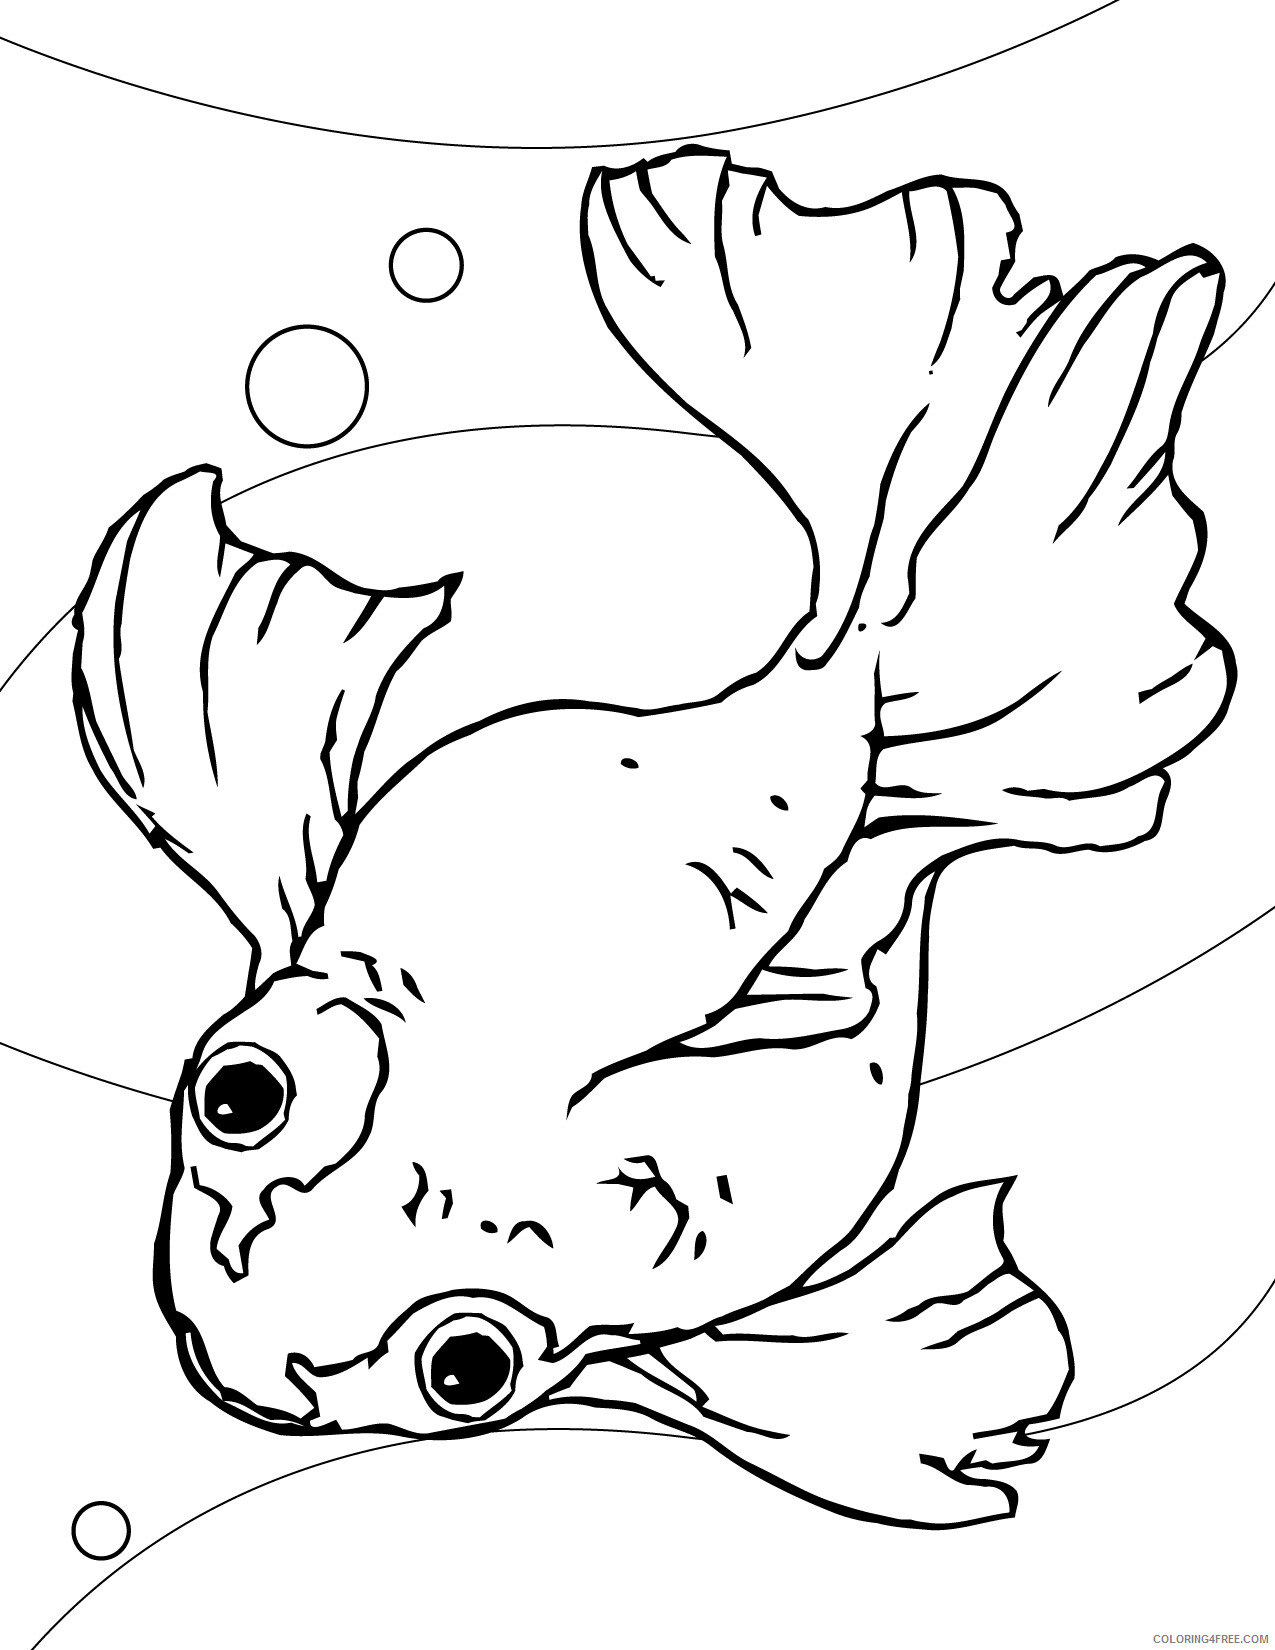 Fish Coloring Pages Animal Printable Sheets Fish For Kids 2021 2084 Coloring4free